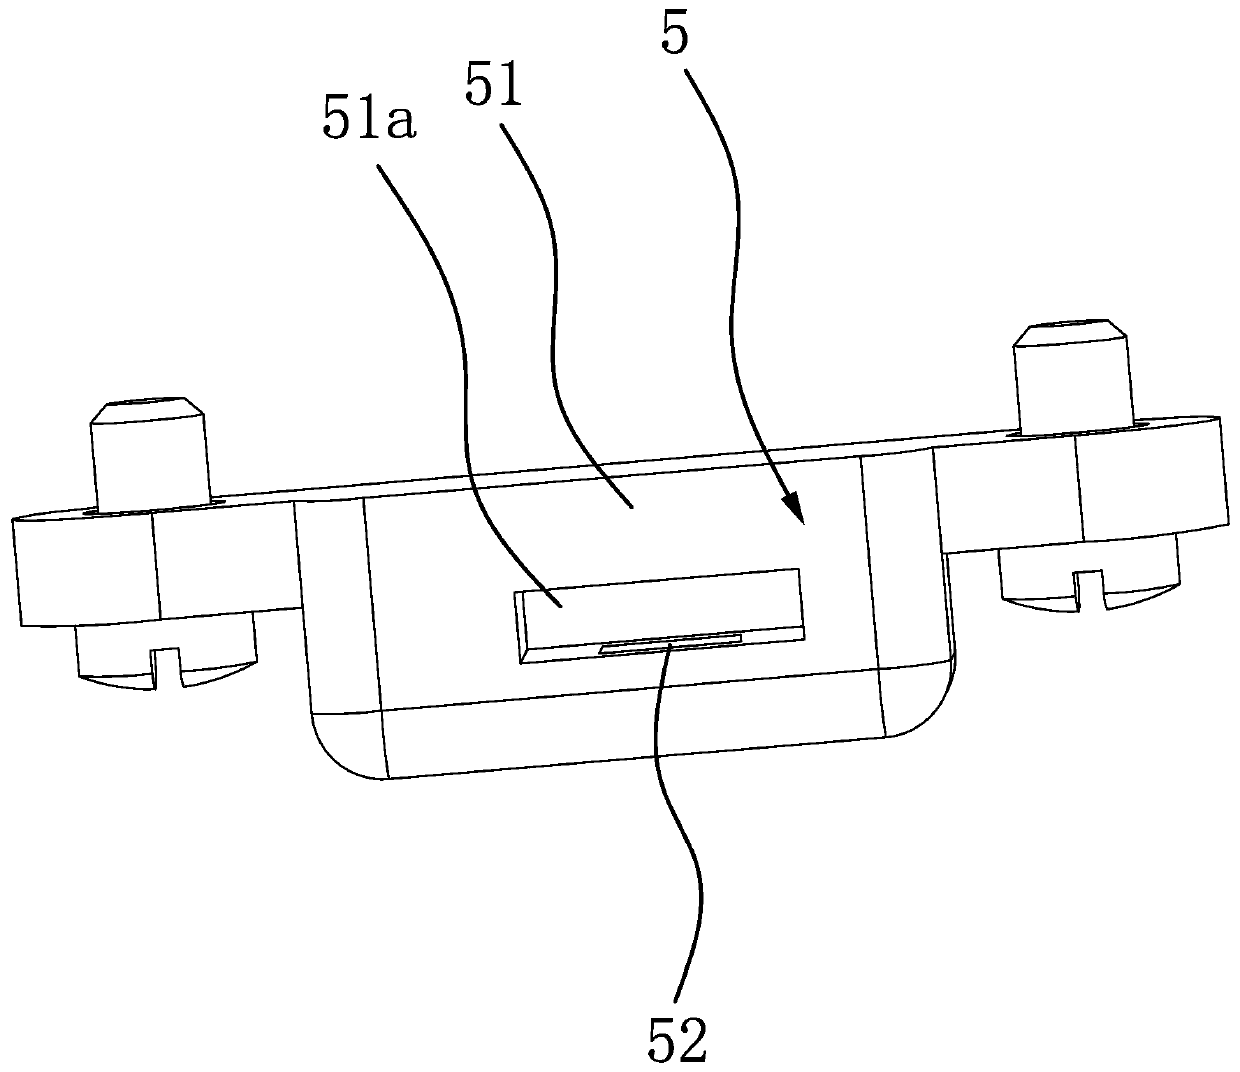 Guiding and threading structure in automatic threading device of industrial sewing machine